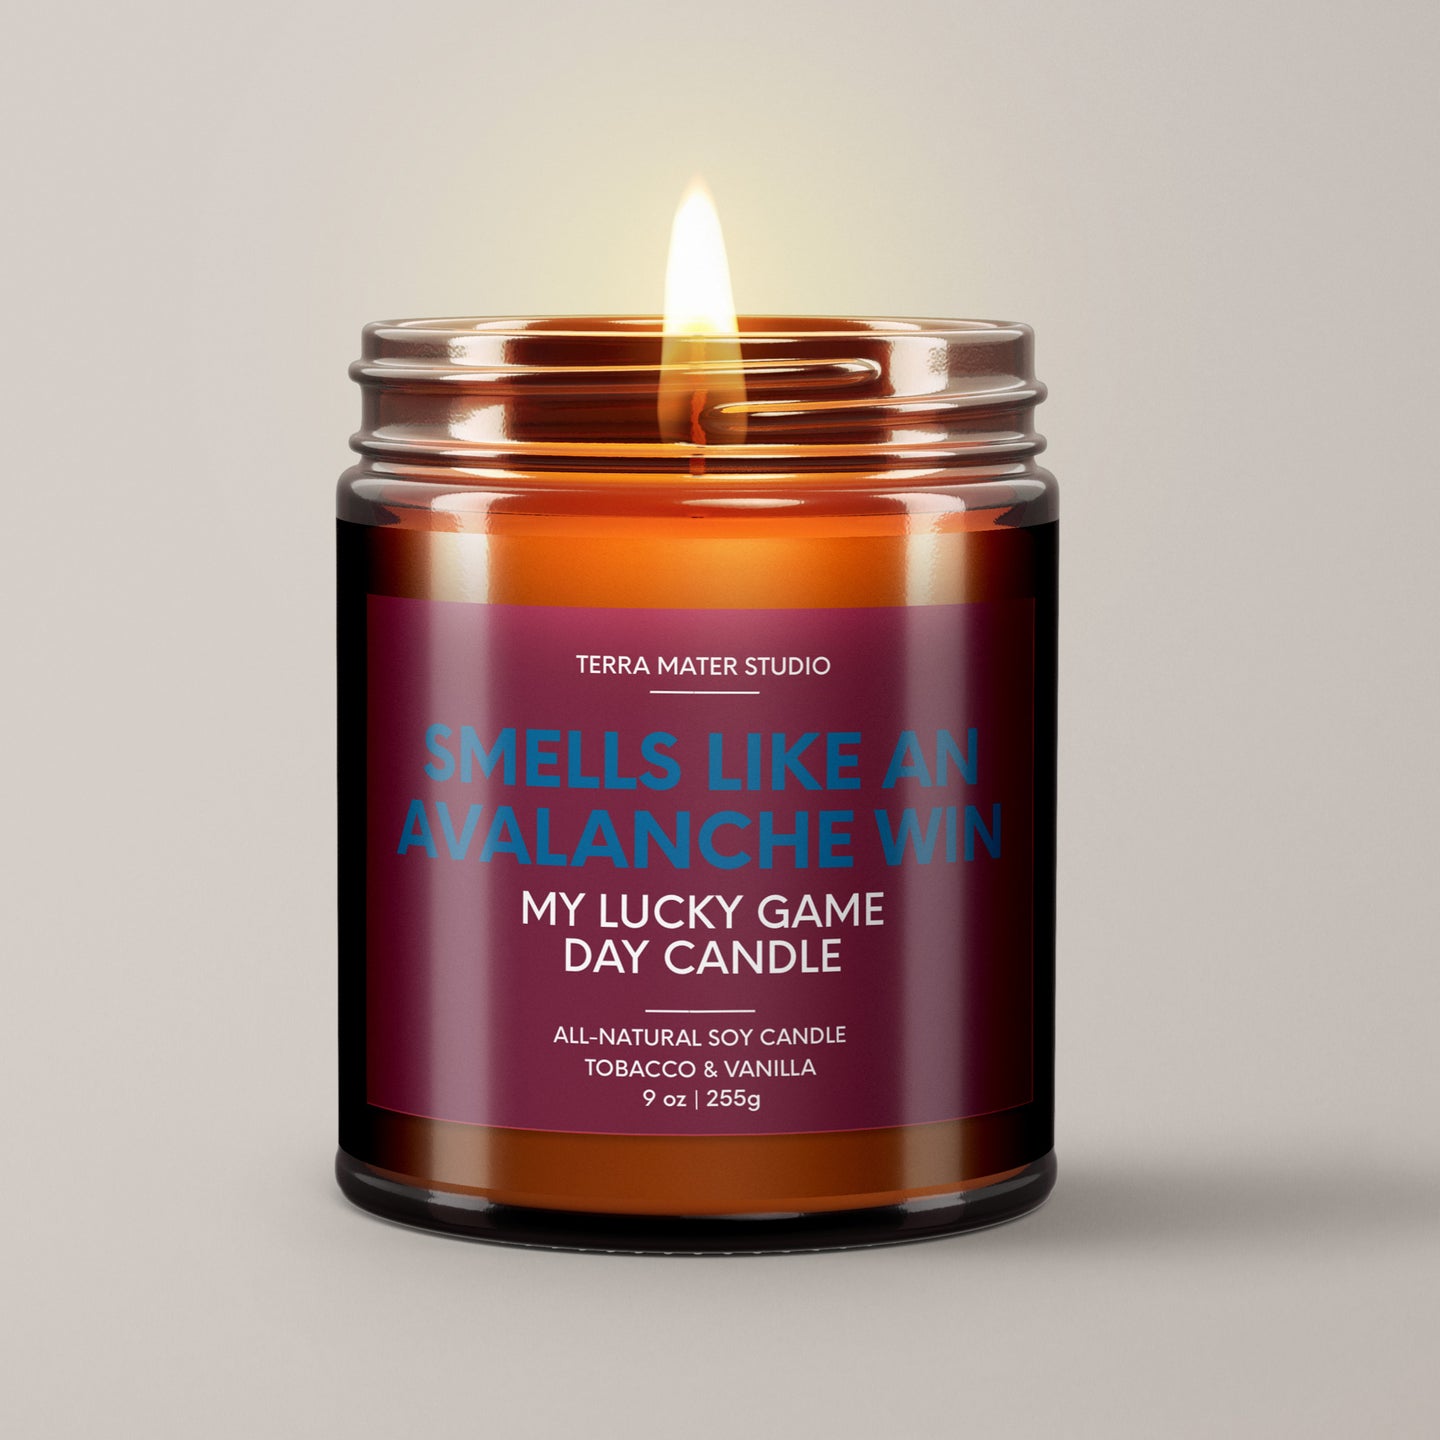 Smells Like An Avalanche Win | Colorado Lucky Game Day Candle | Soy Wax Candle